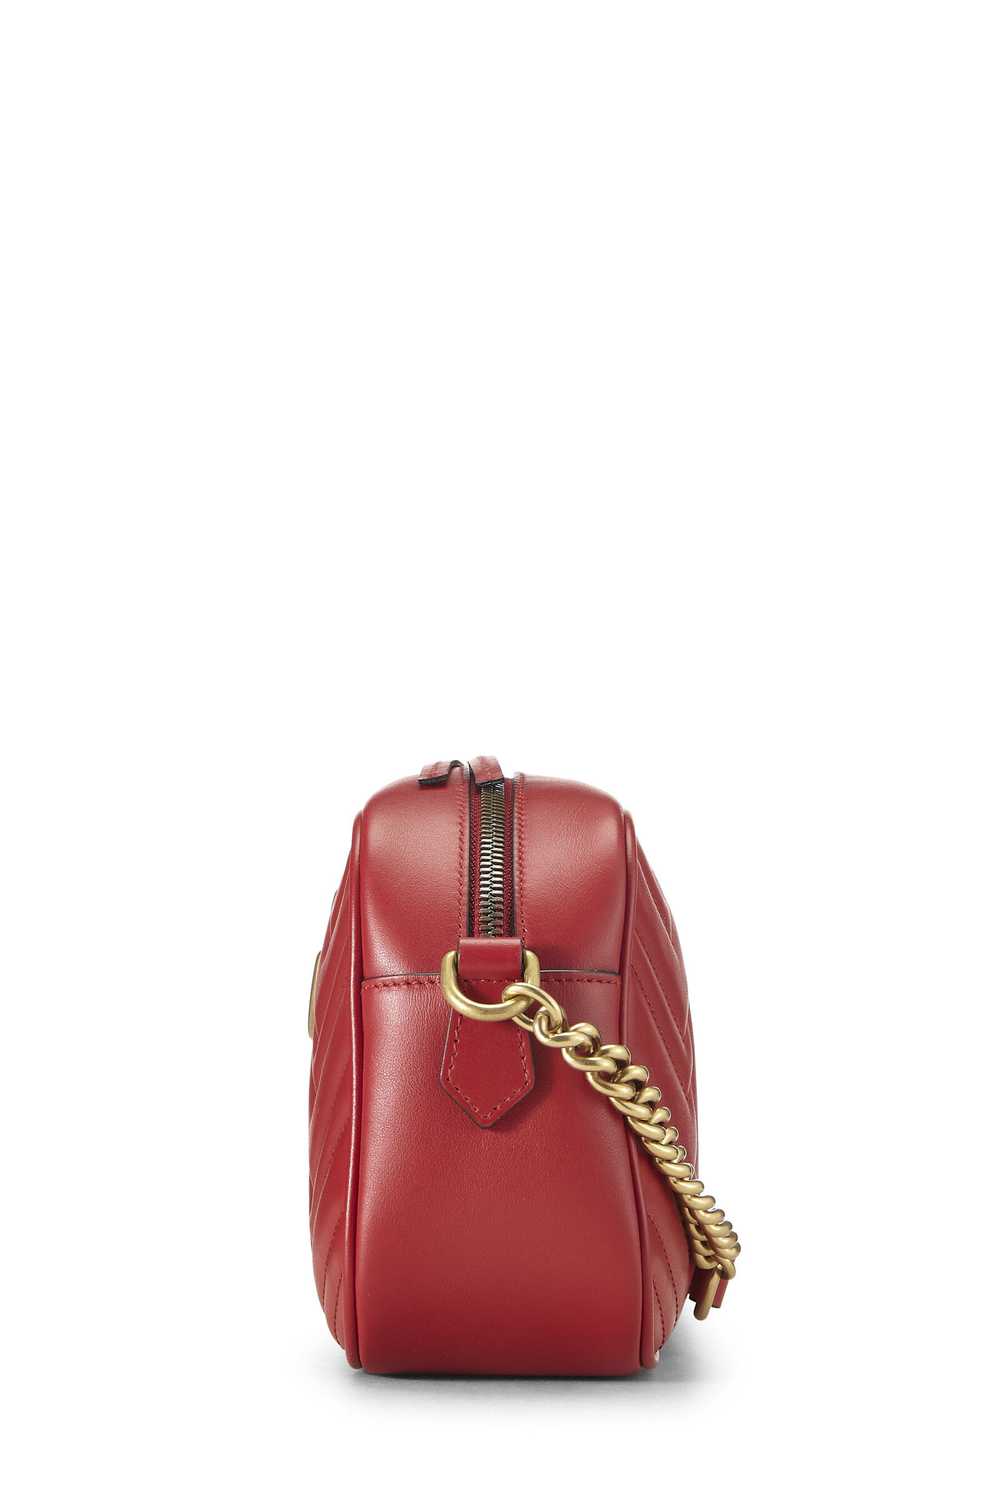 Red Leather GG Marmont Crossbody Bag Small - image 3